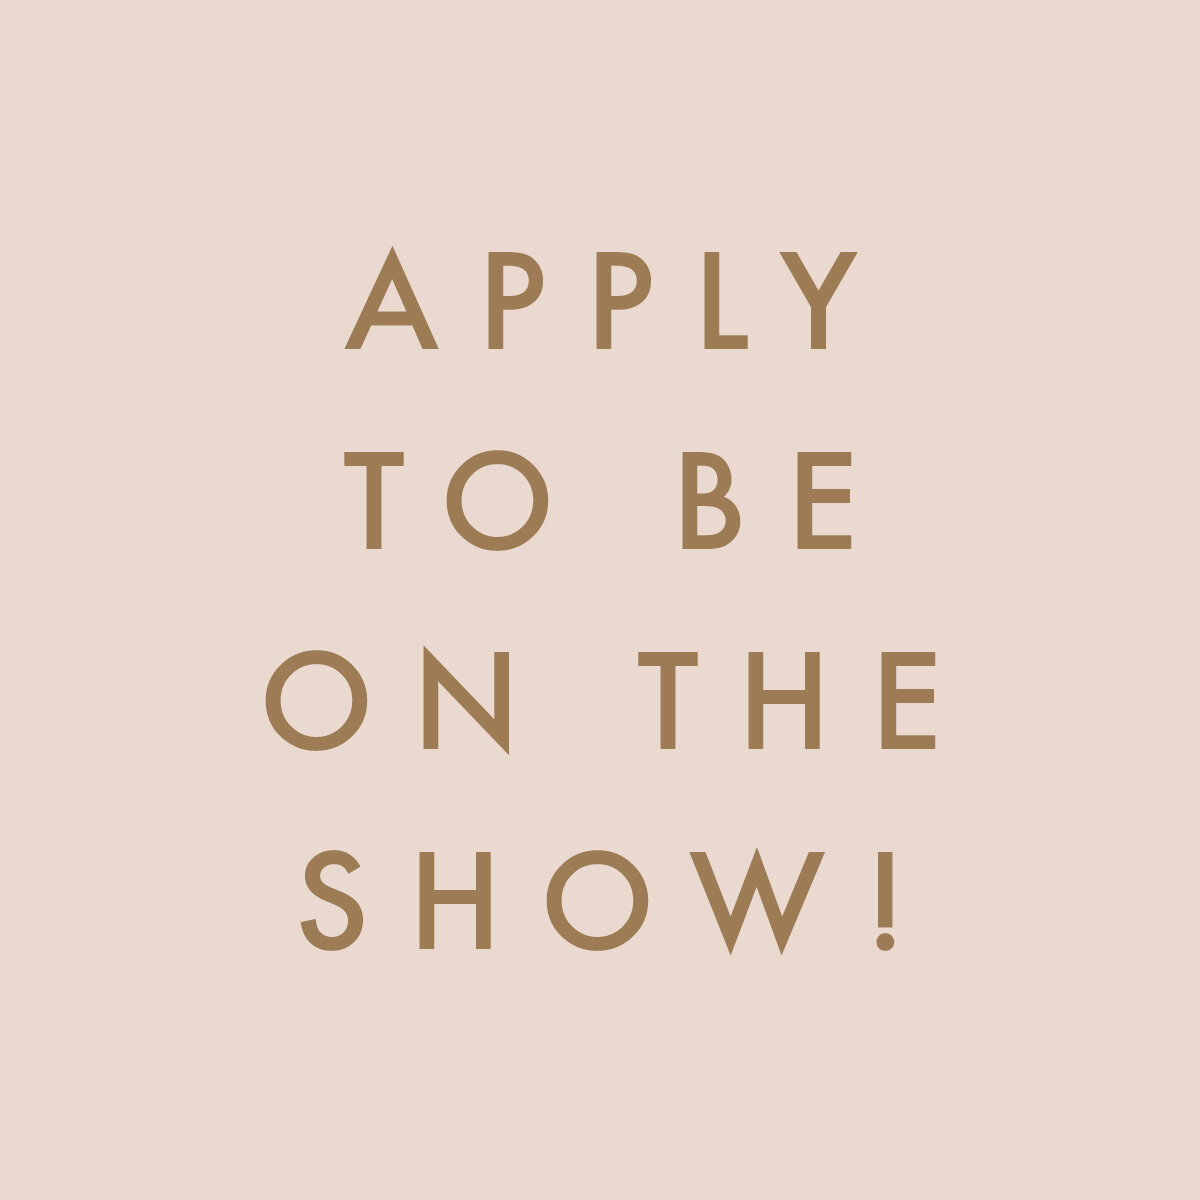 Apply to be on the show!